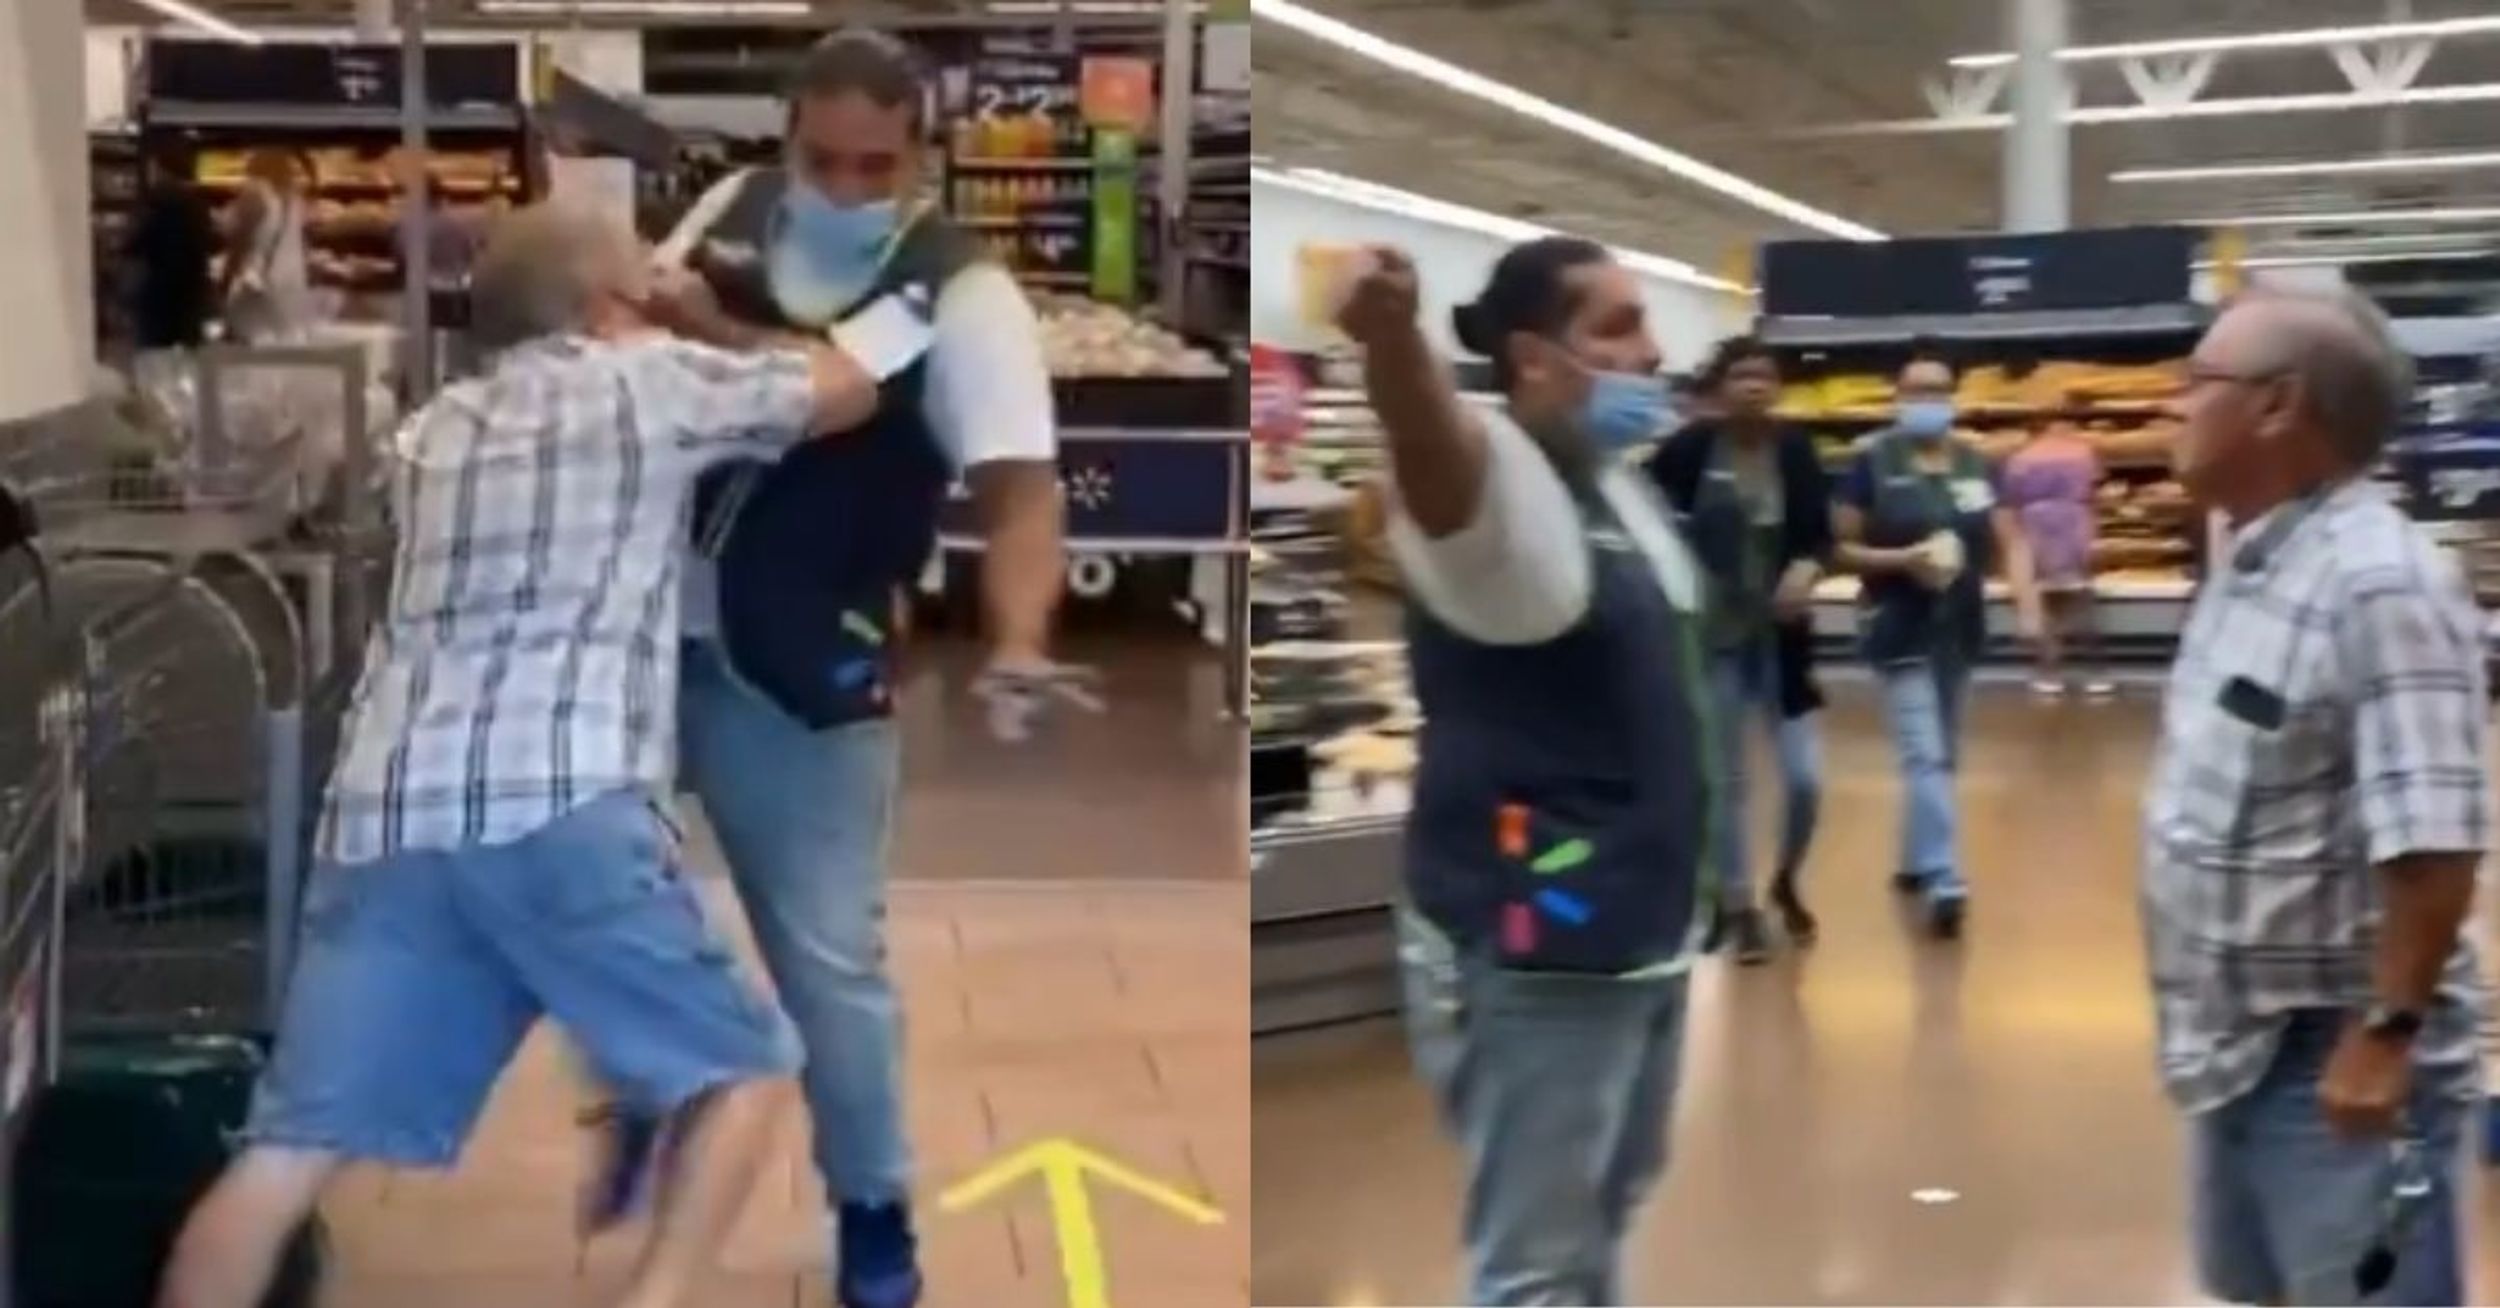 Belligerent Florida Man Shoves His Way Into Walmart After Being Told He Needs A Mask